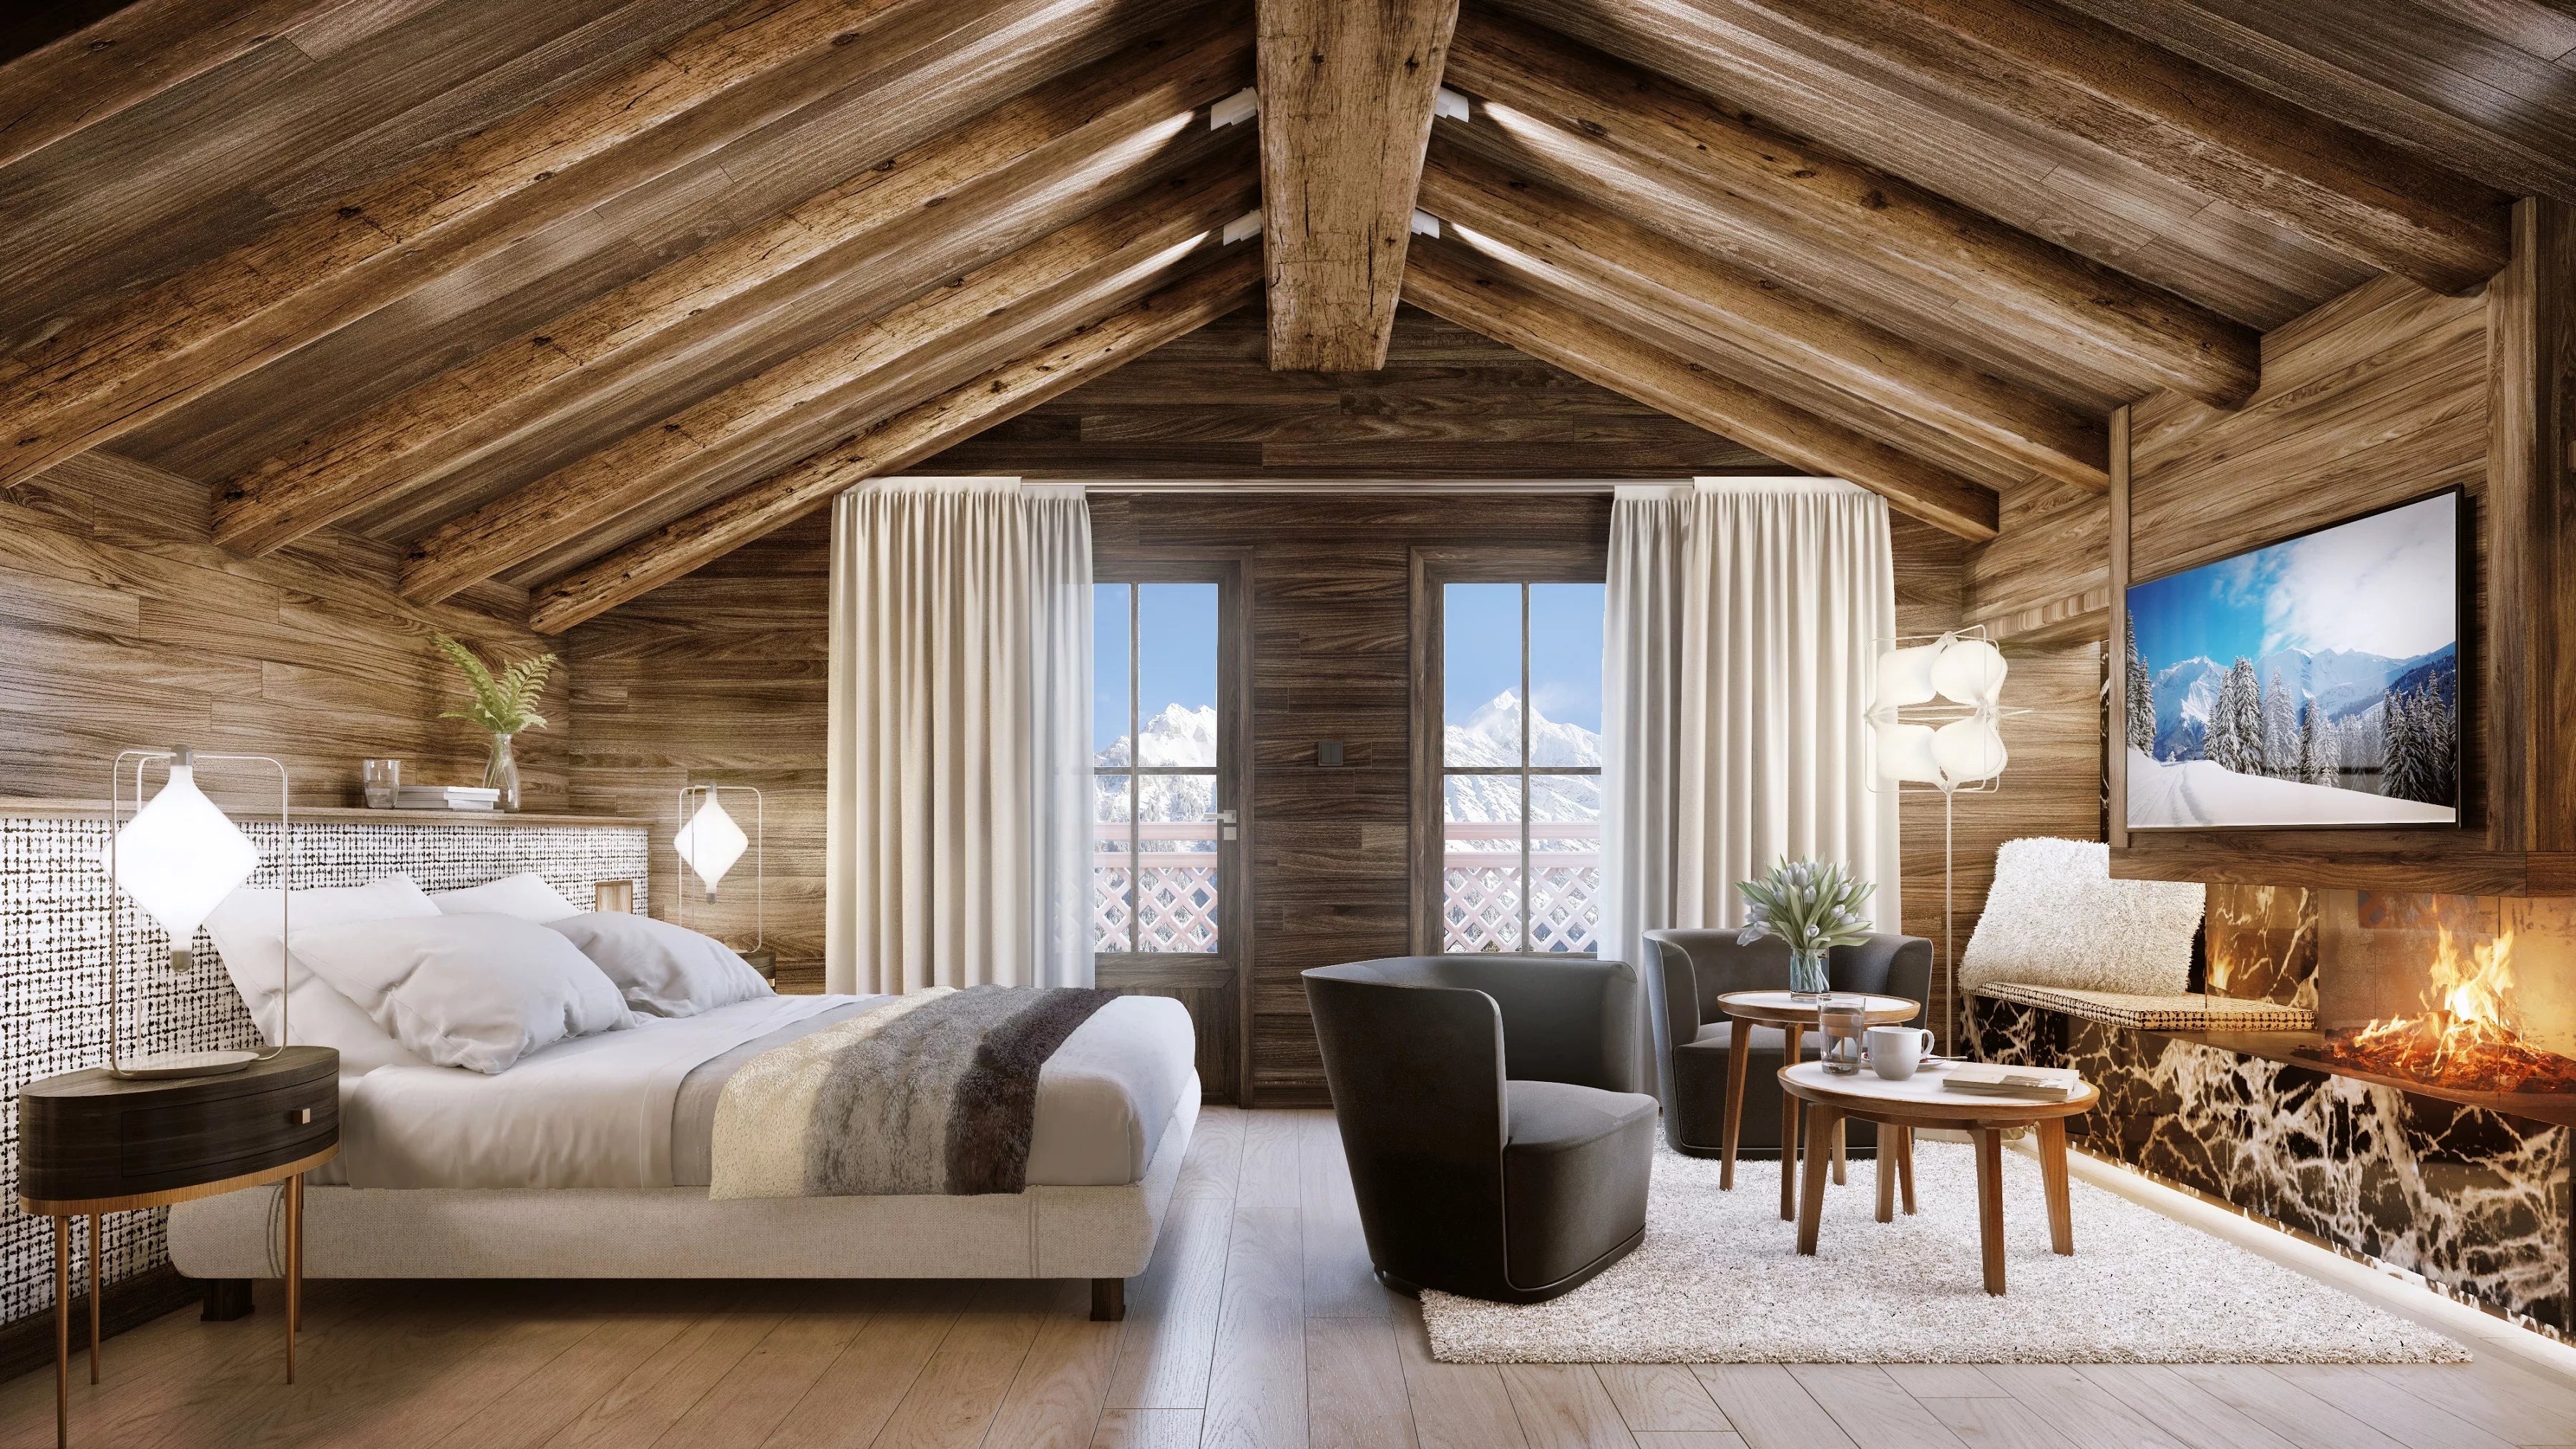 5 best hotels in the Alps for your winter holidays - Les Petits Basics